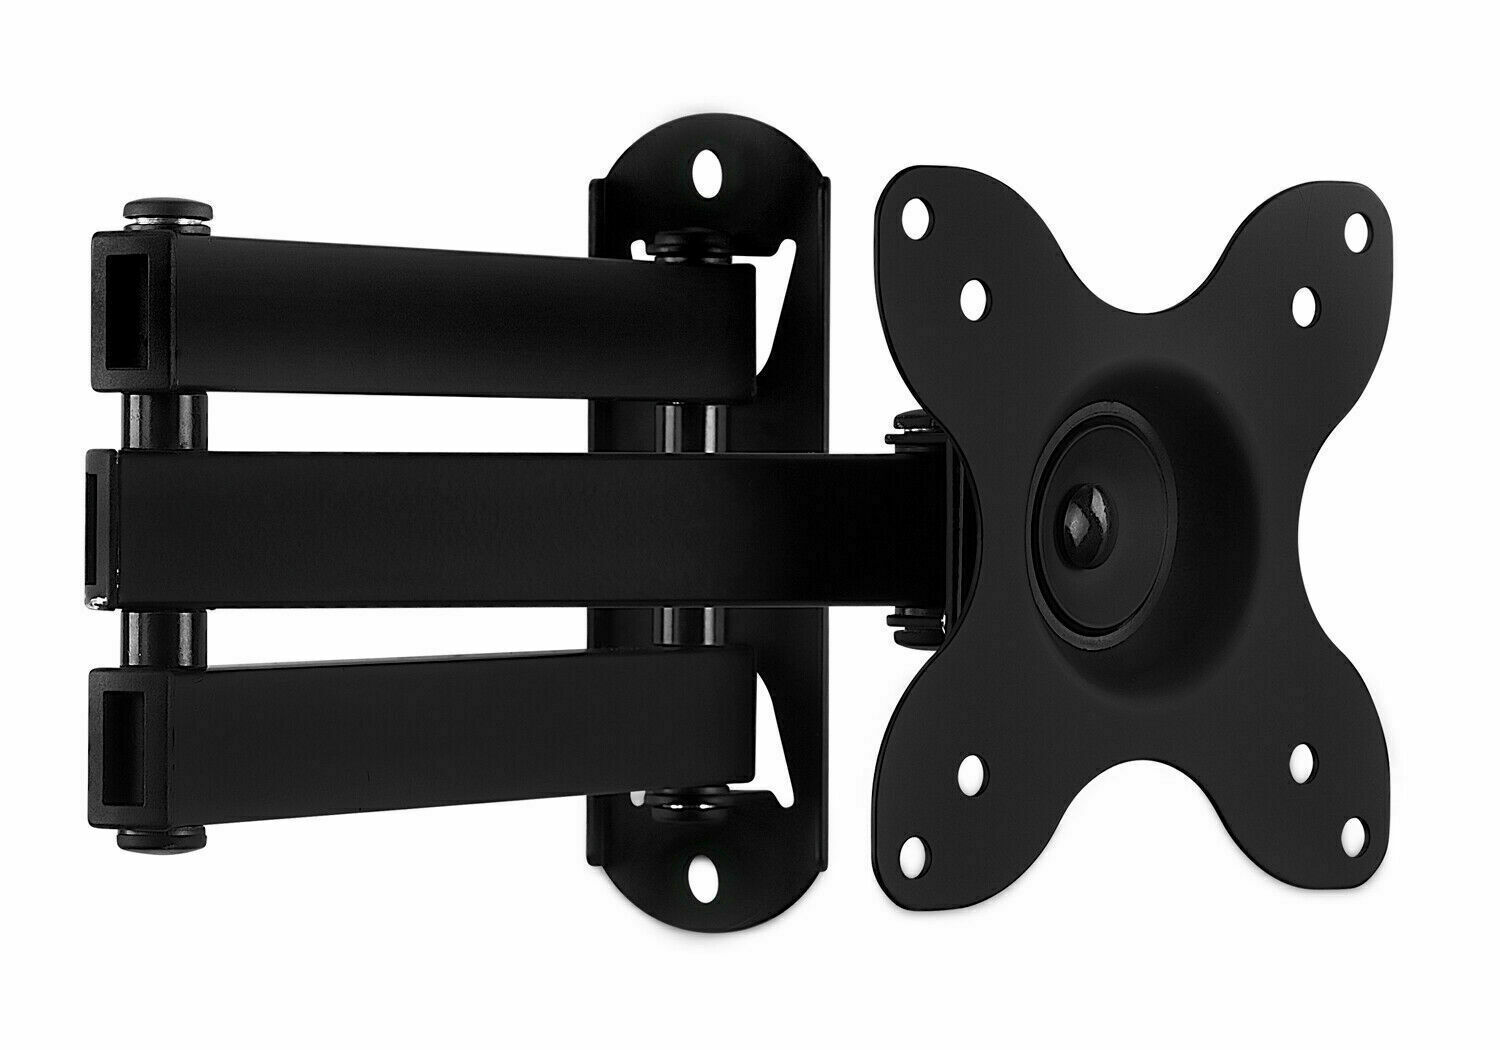 Mount-It Full Motion TV Wall Mount for 19-30 Inch TVs and Computer Monitors